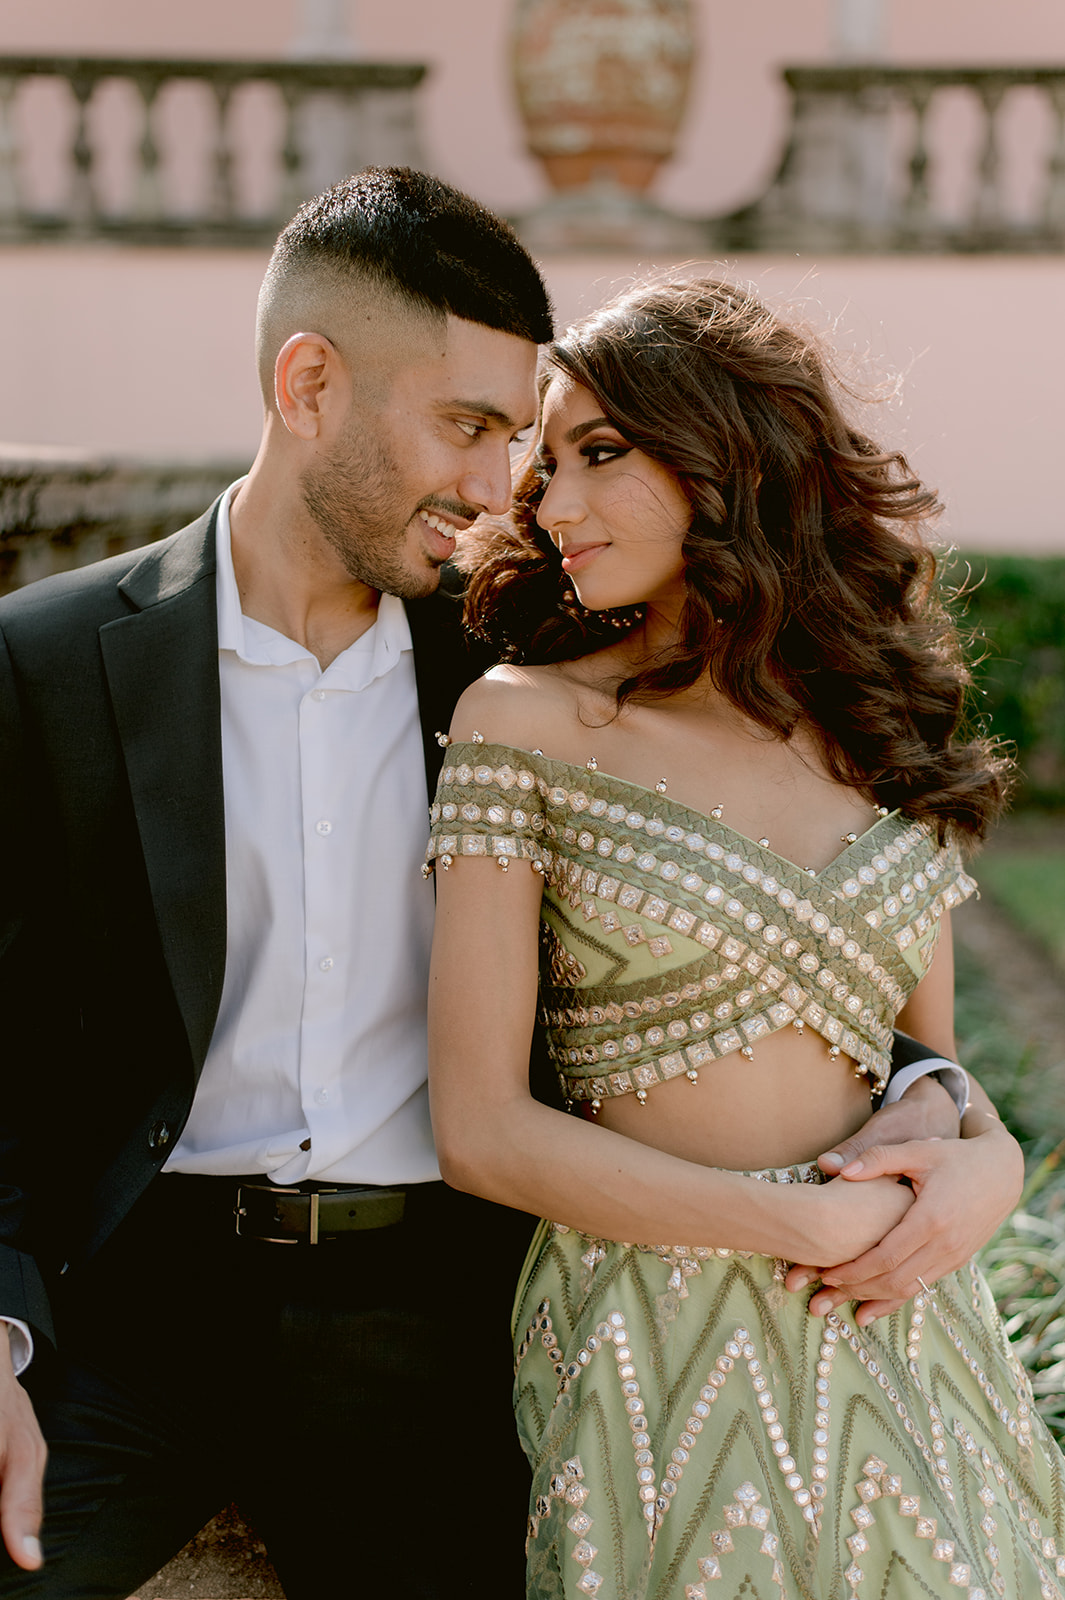 "Elegant and romantic engagement session captured at the Ringling Museum with stunning Indian attire"
